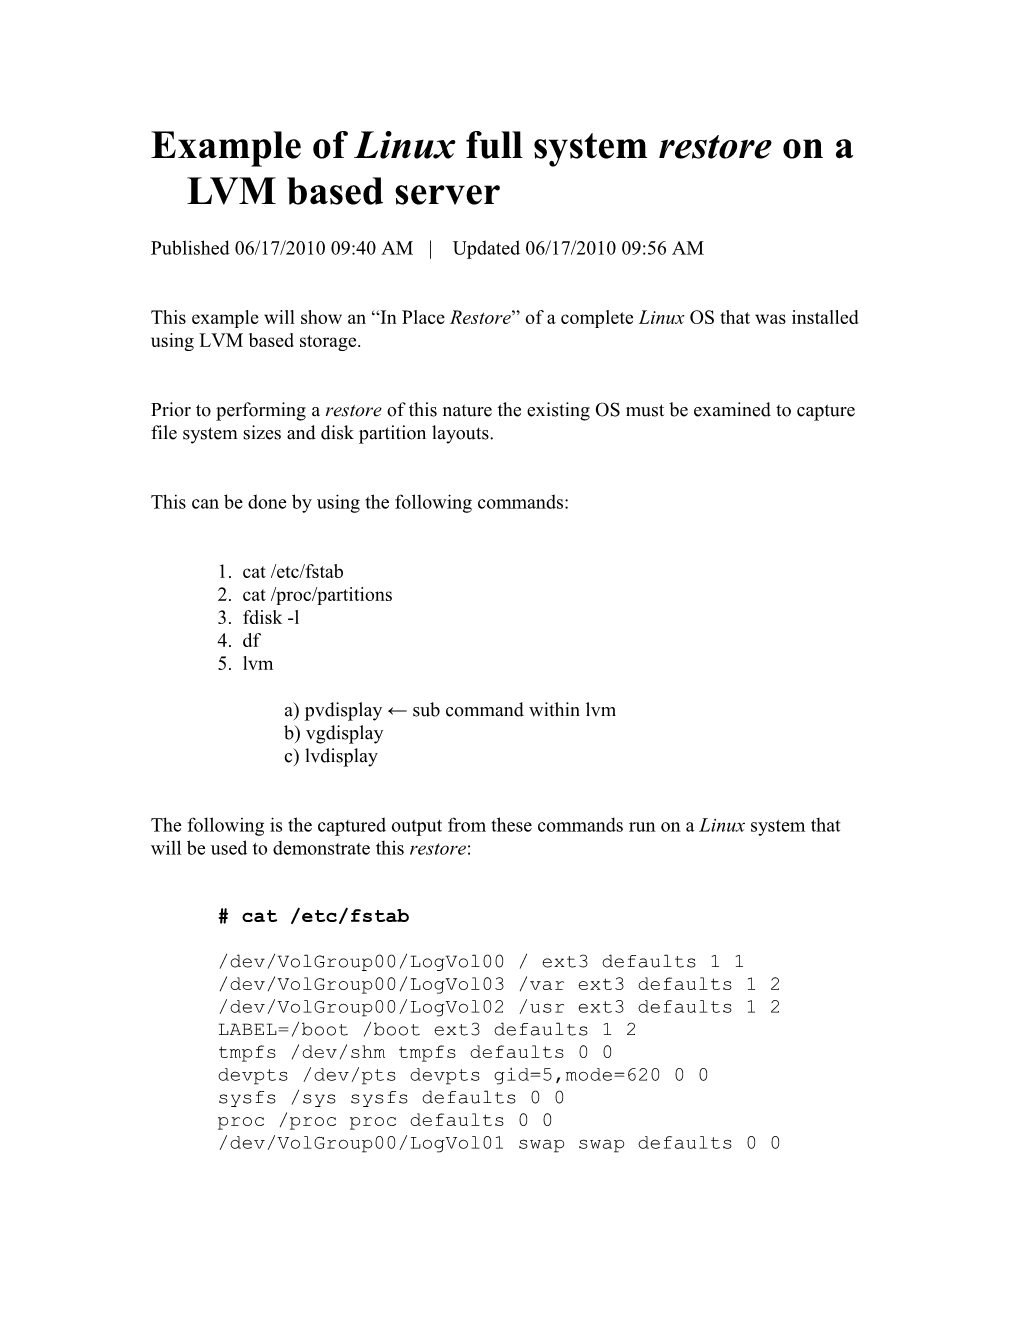 Example of Linux Full System Restore on a LVM Based Server